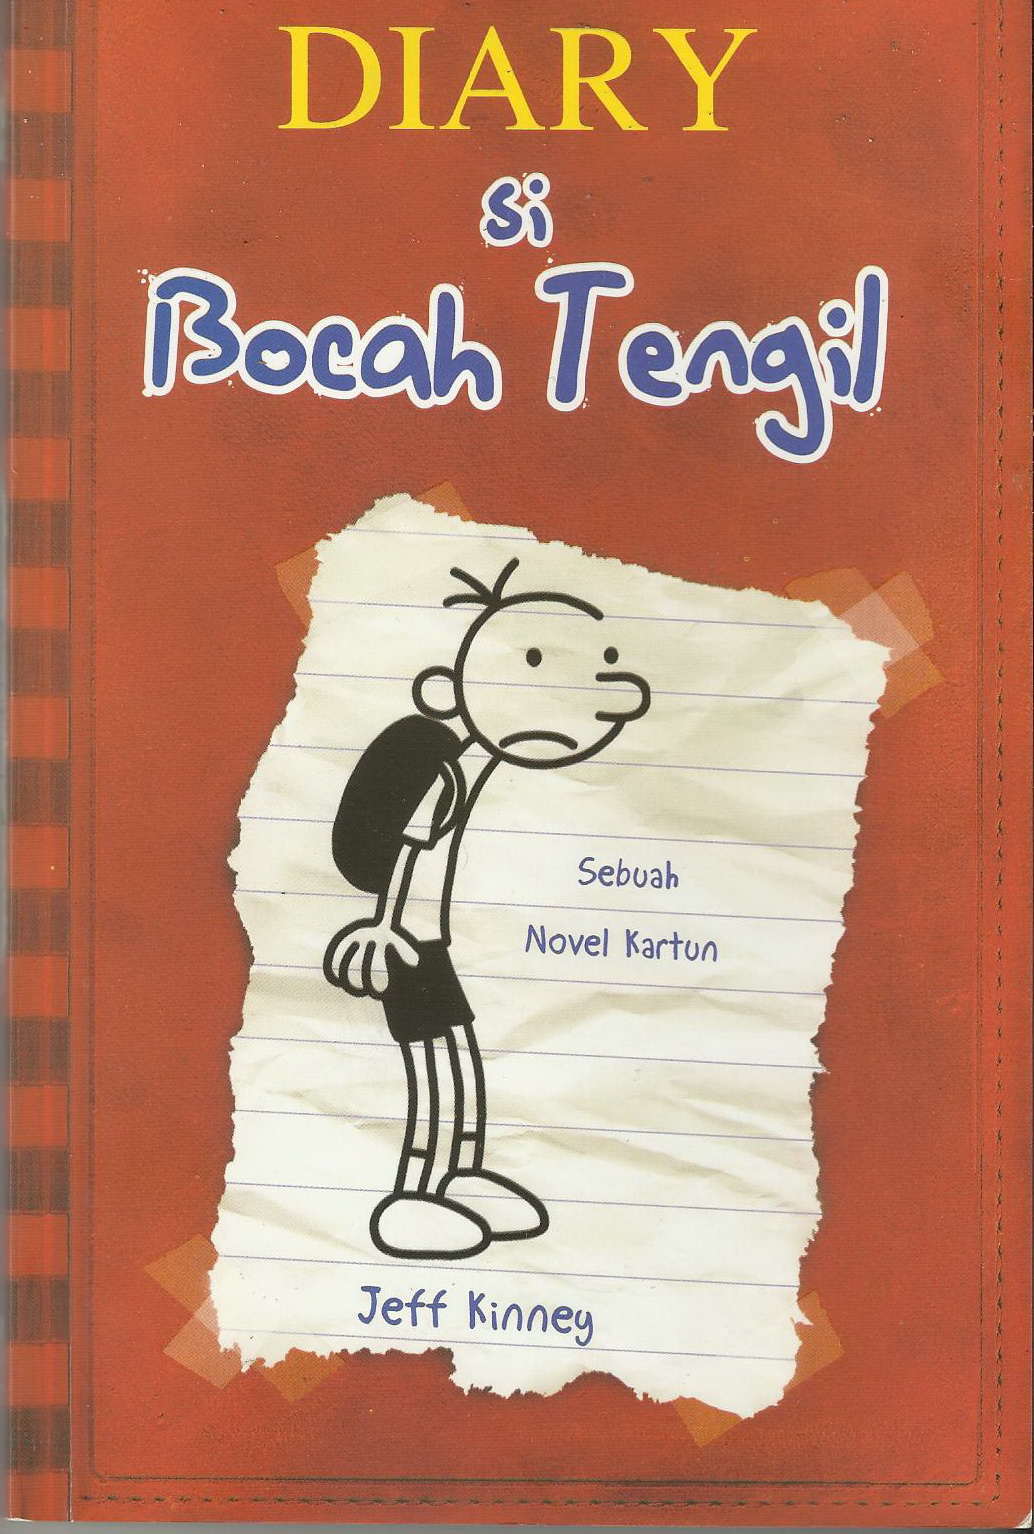 ENGLISH BOOKS: DIARY OF A WIMPY KID